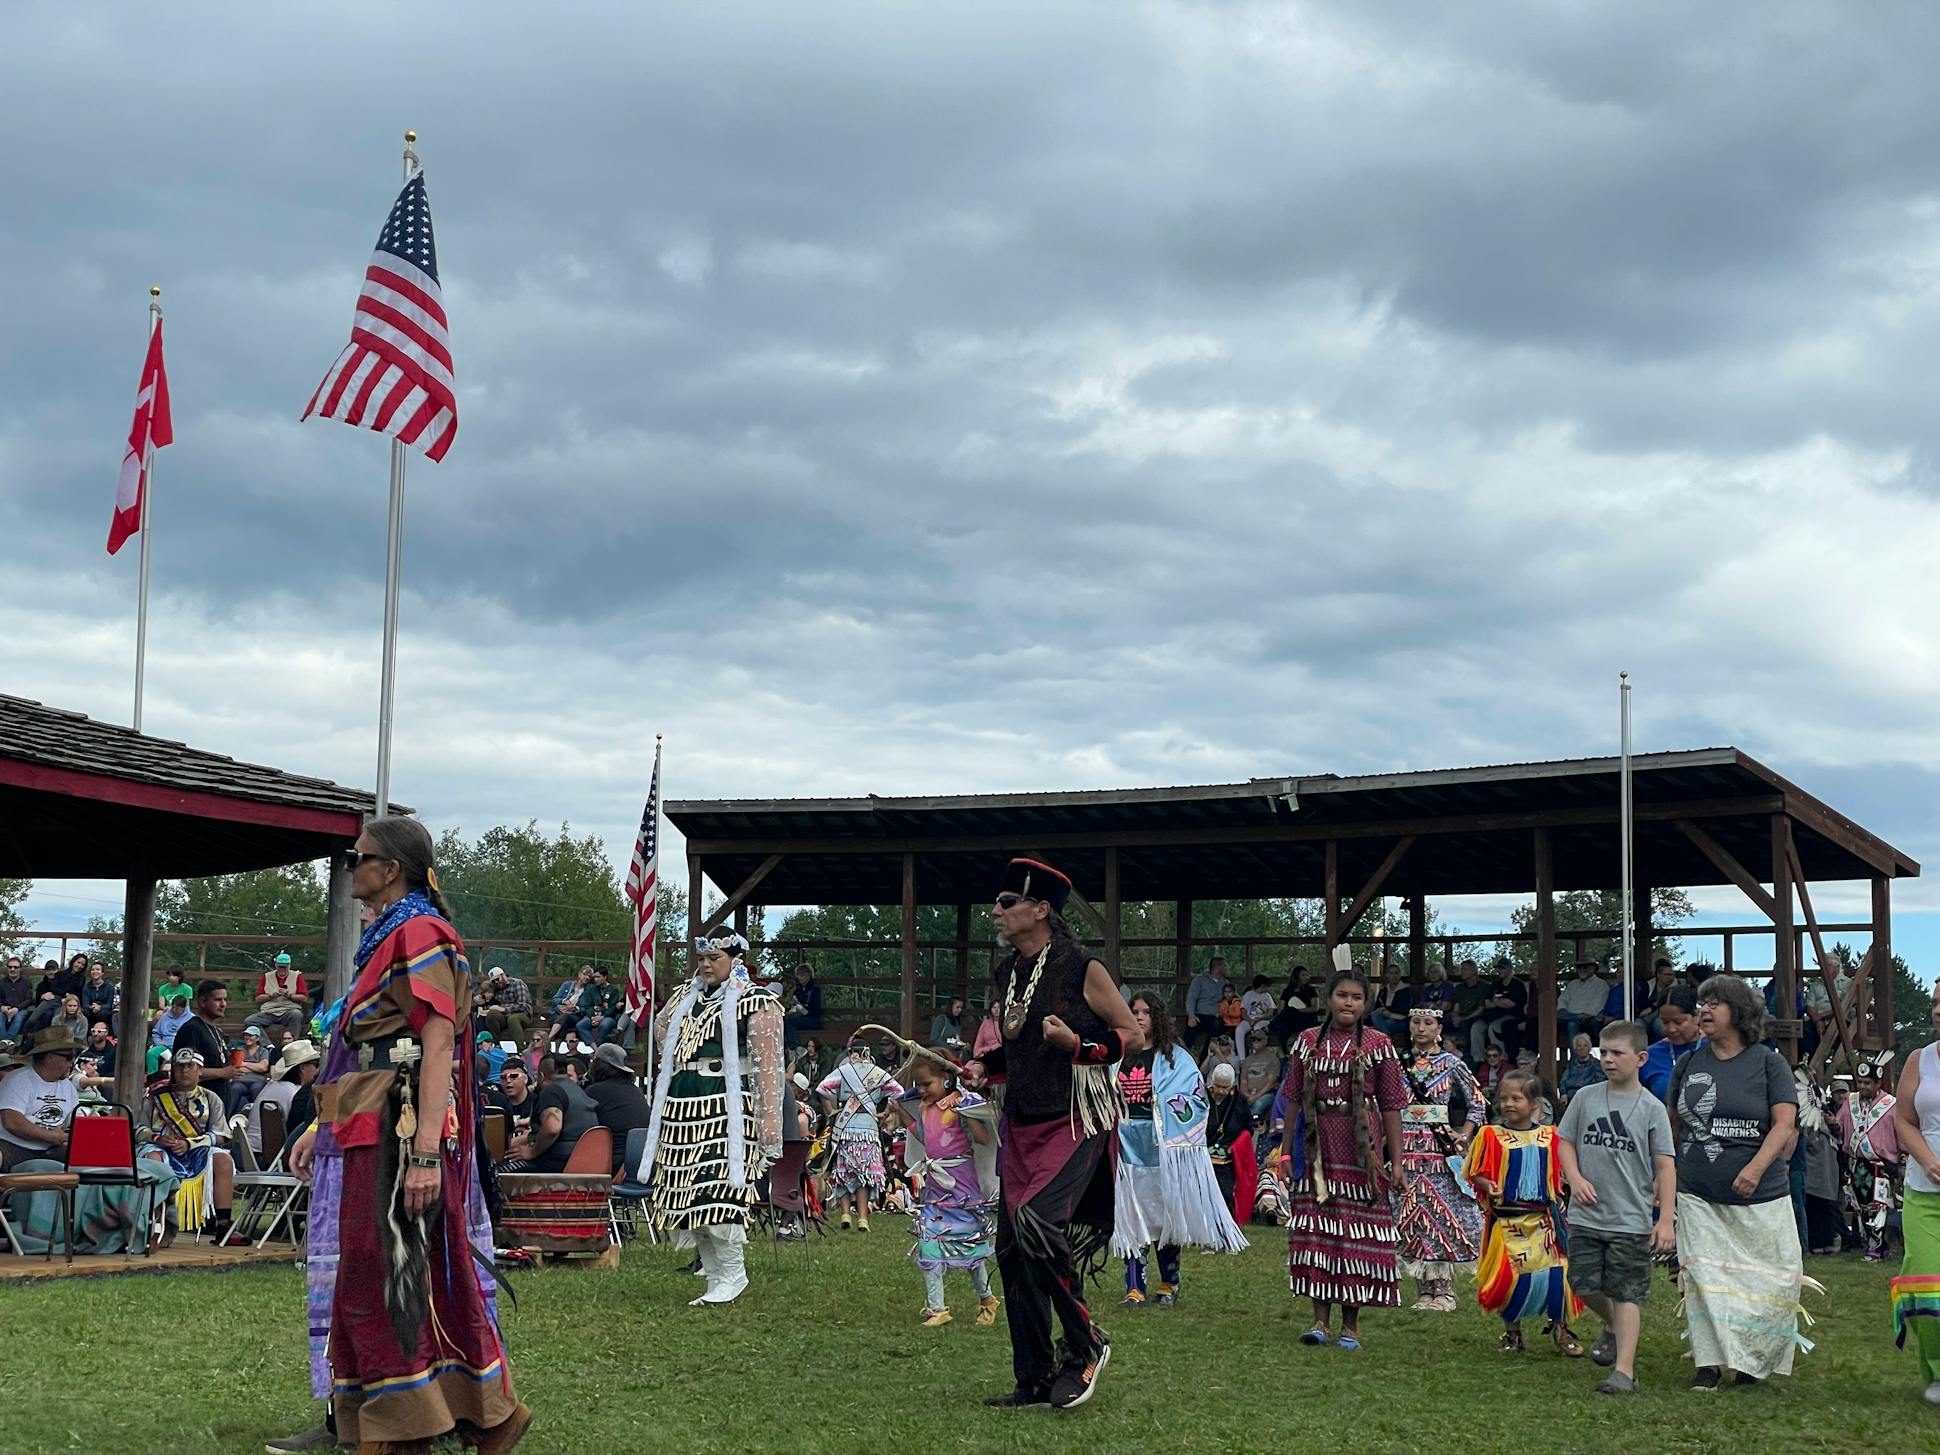 The pow-wow is hosted by the Grand Portage Band and also features dozens of vendors selling clothing and food.